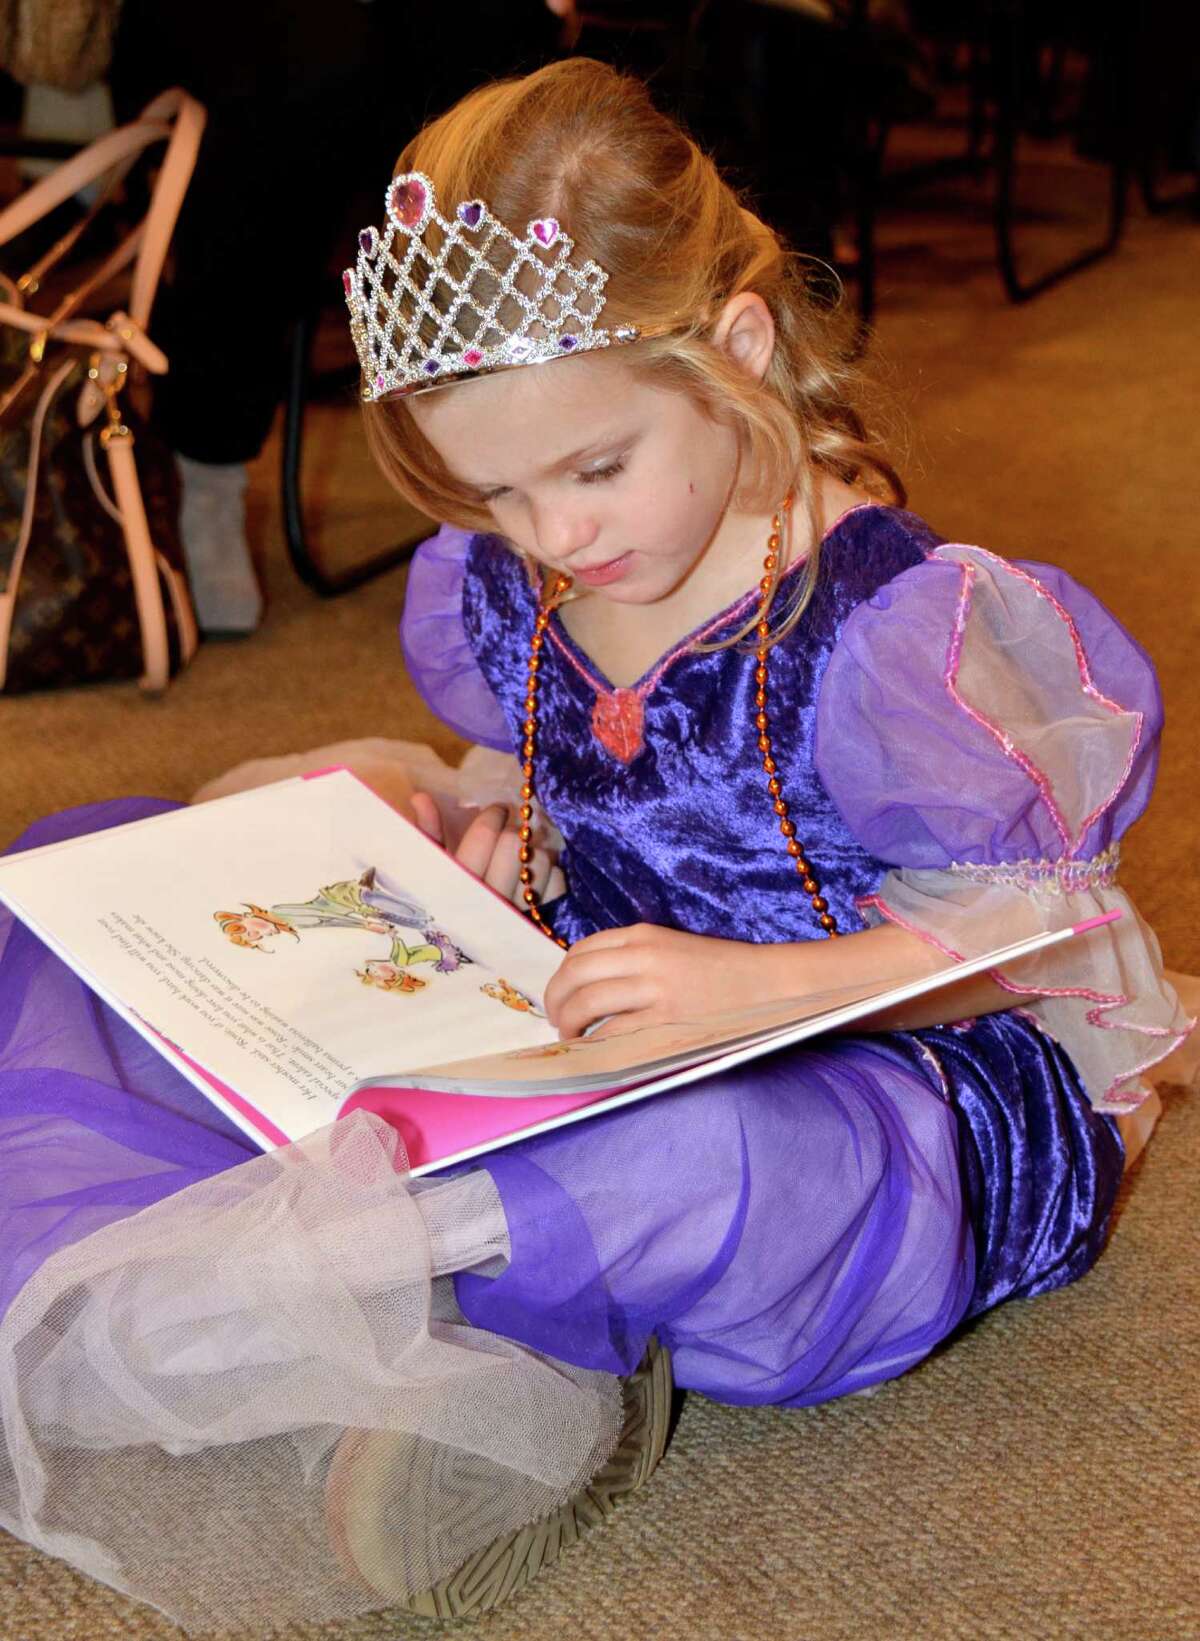 Four-year-old Anissa Mullen, born in England herself, patiently awaits the arrival of Sarah Ferguson, the Duchess of York, to sign her new book, "Ballerina Rosie," at the New Canaan Library on Sunday. Dec. 2, 2012.